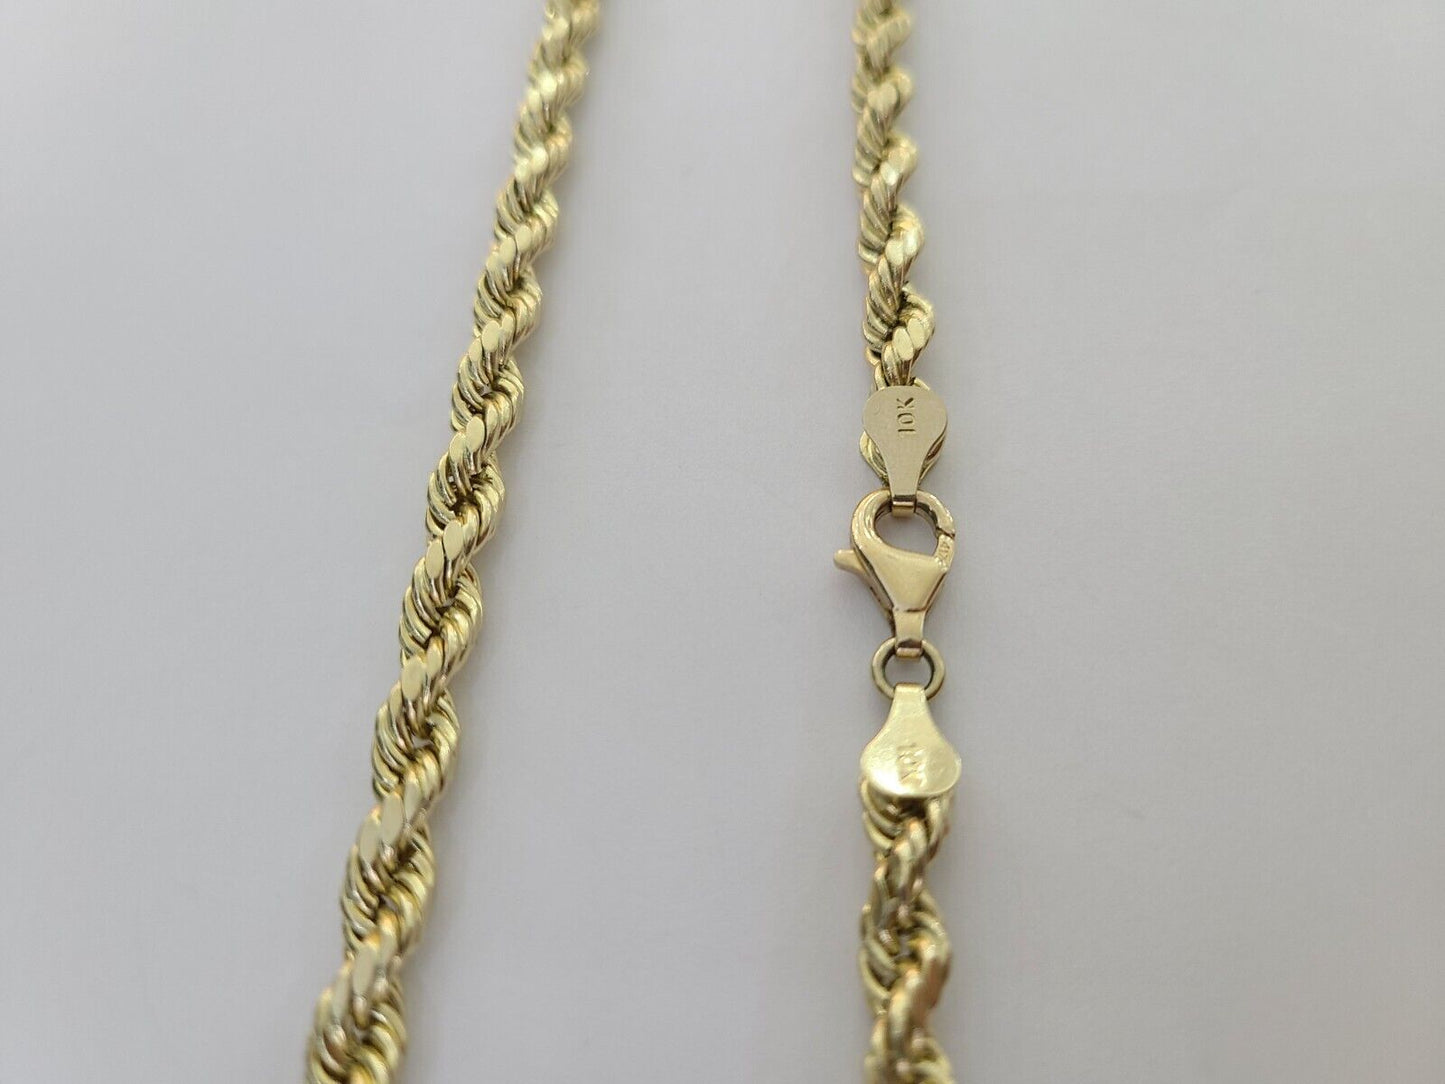 10K Yellow Gold Crown Pendent Charm 6mm Rope Chain 18" - 30" Inch Real